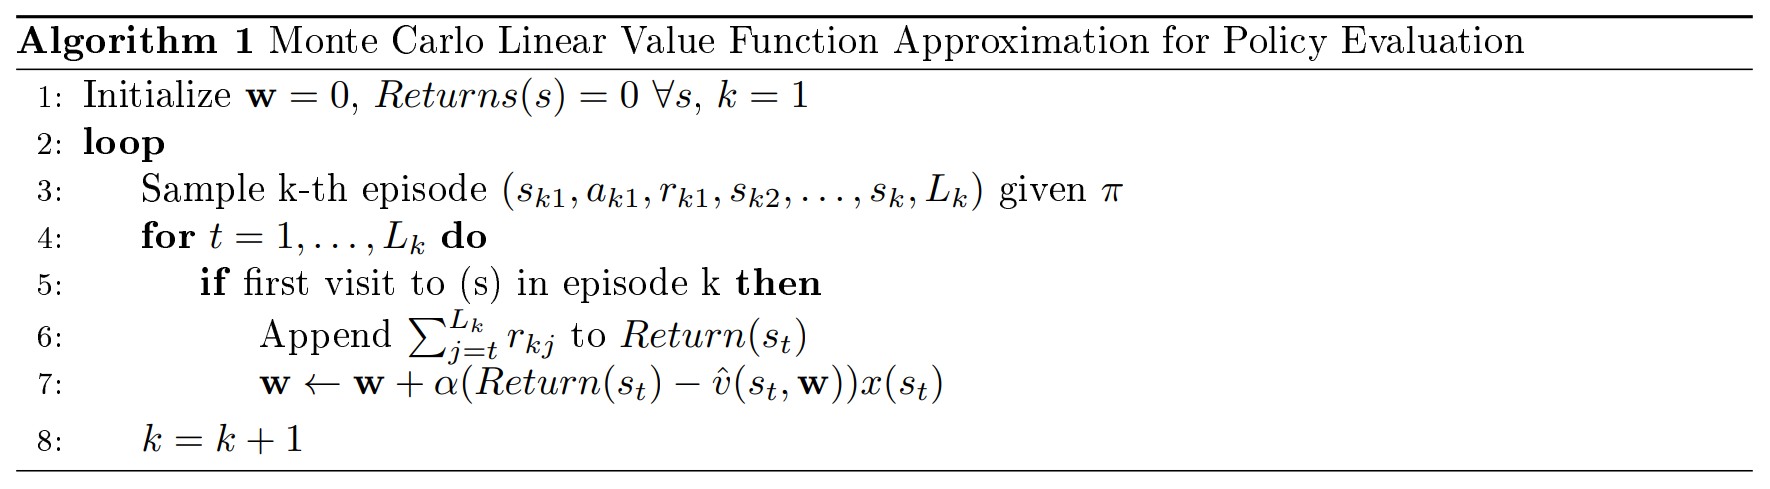 docs/stanford-cs234-notes-zh/img/fig5_alg_1.png